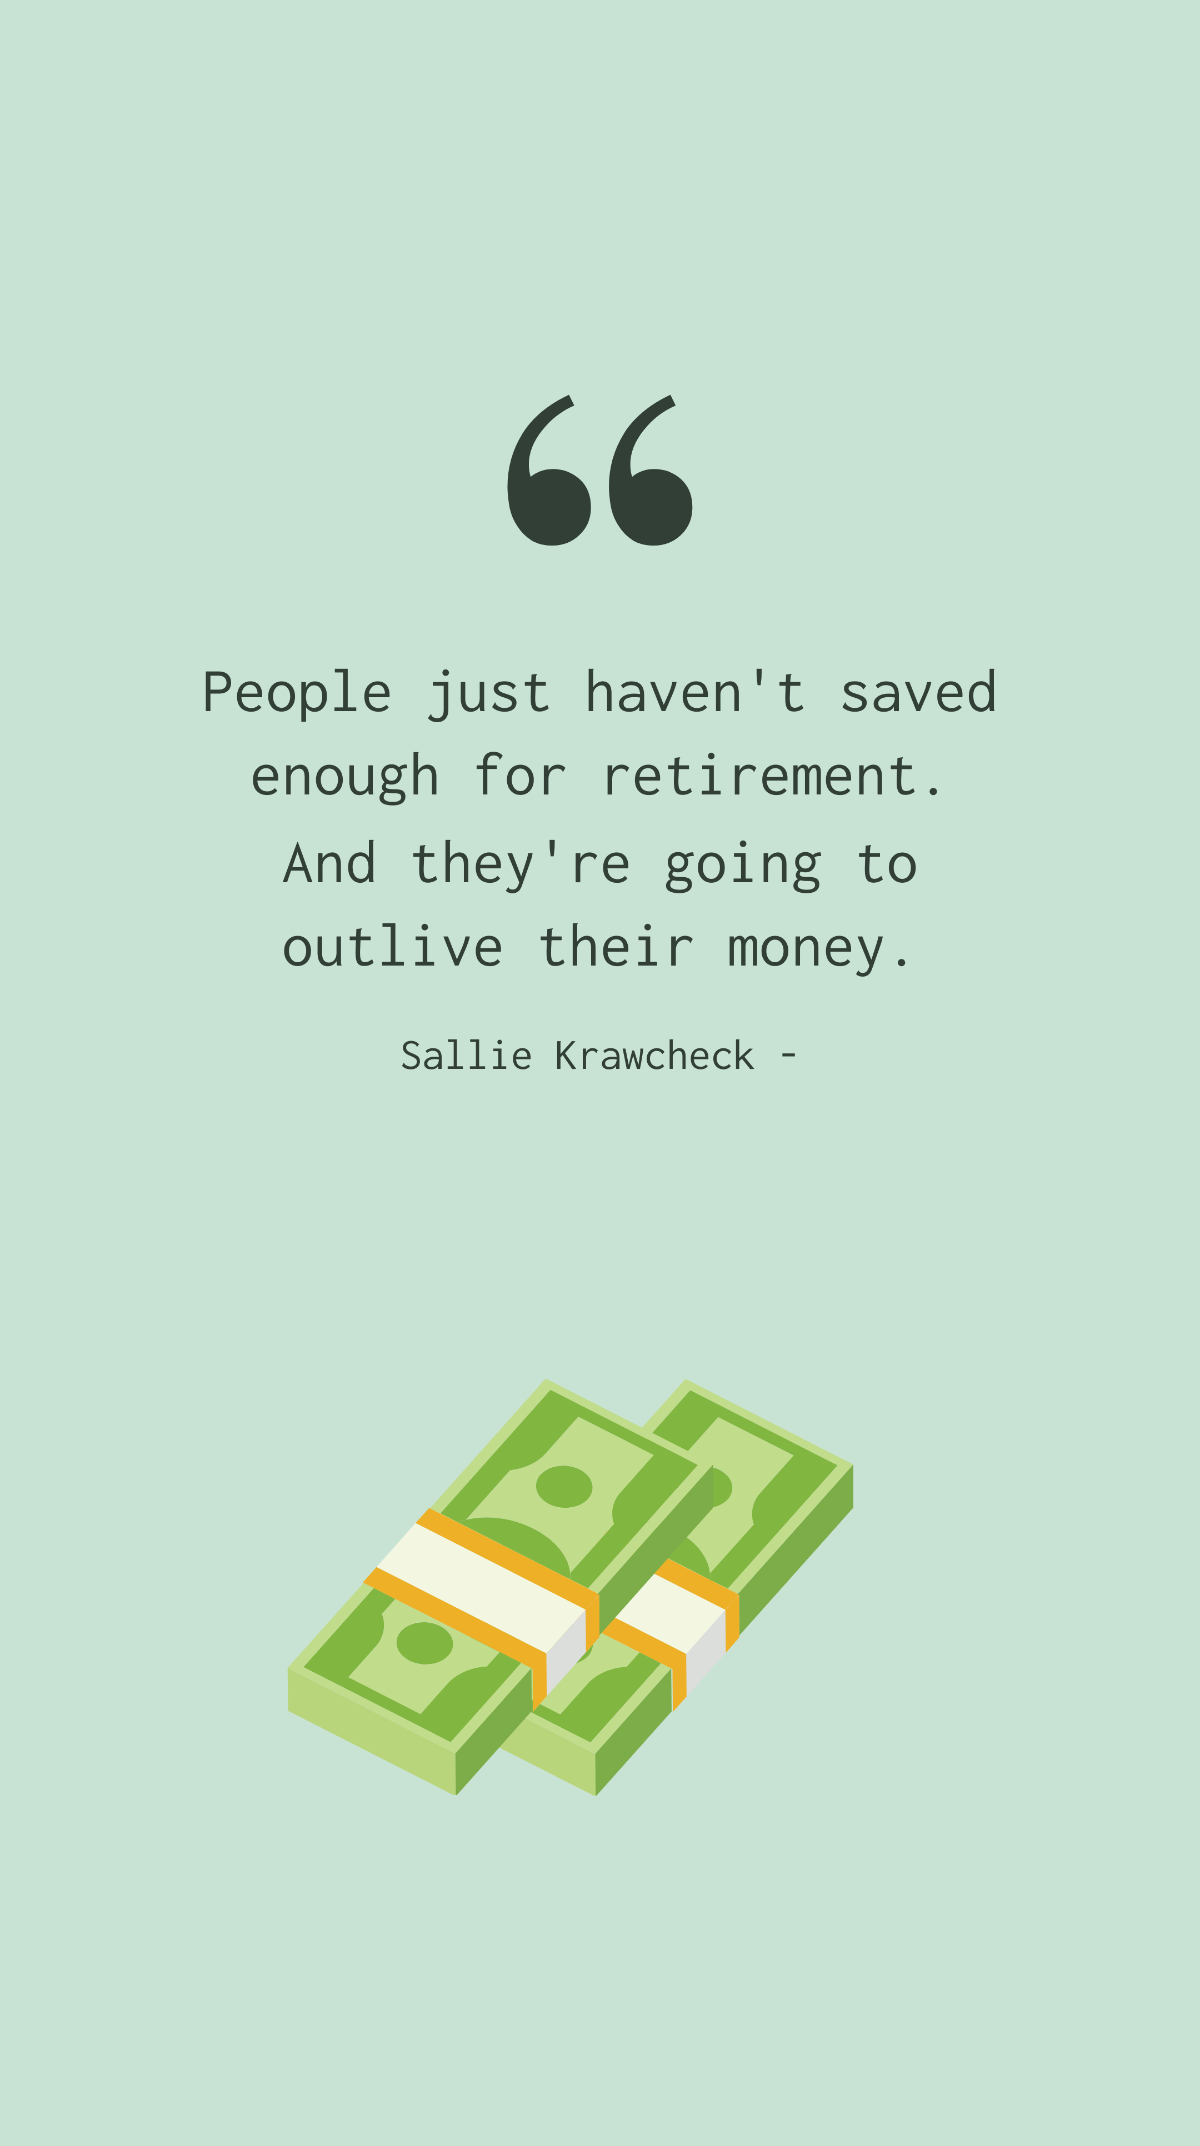 Sallie Krawcheck - People just haven't saved enough for retirement. And they're going to outlive their money. Template